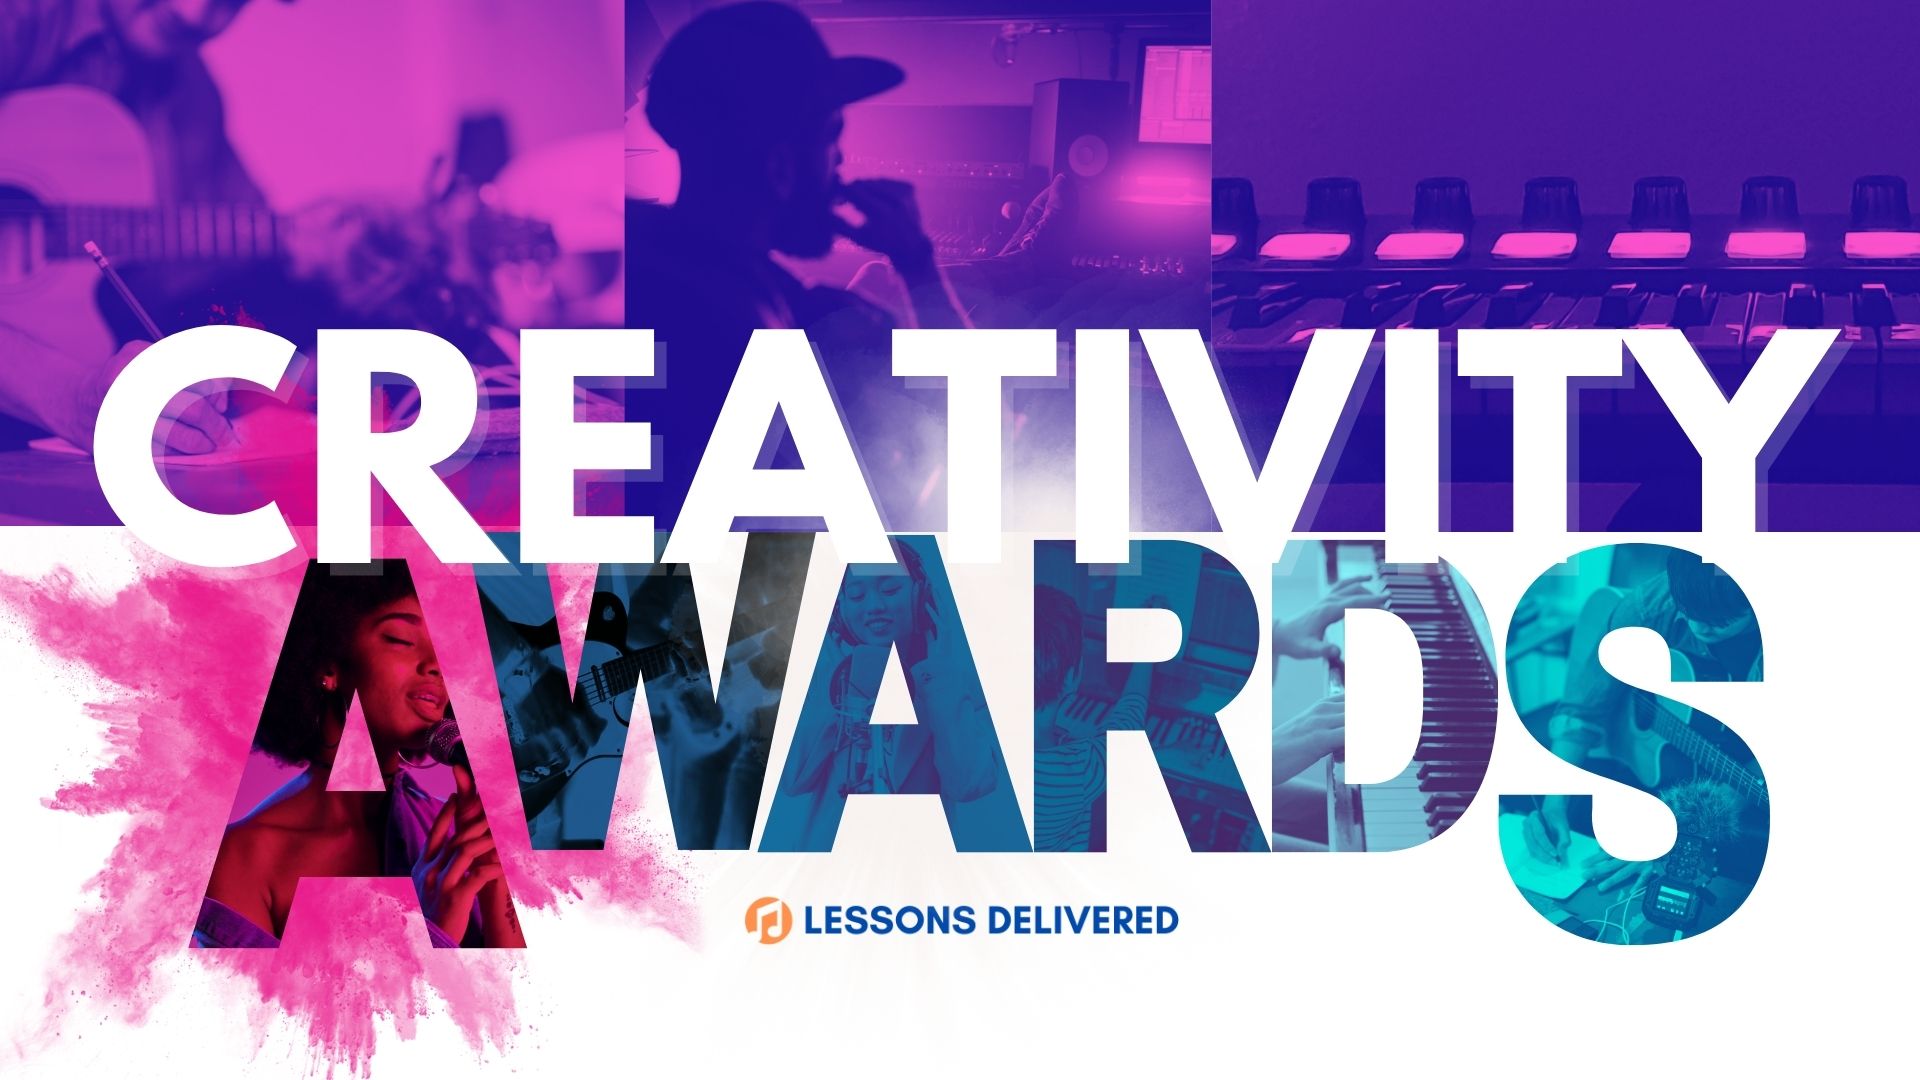 CREATIVITY AWARDS | Lessons Delivered